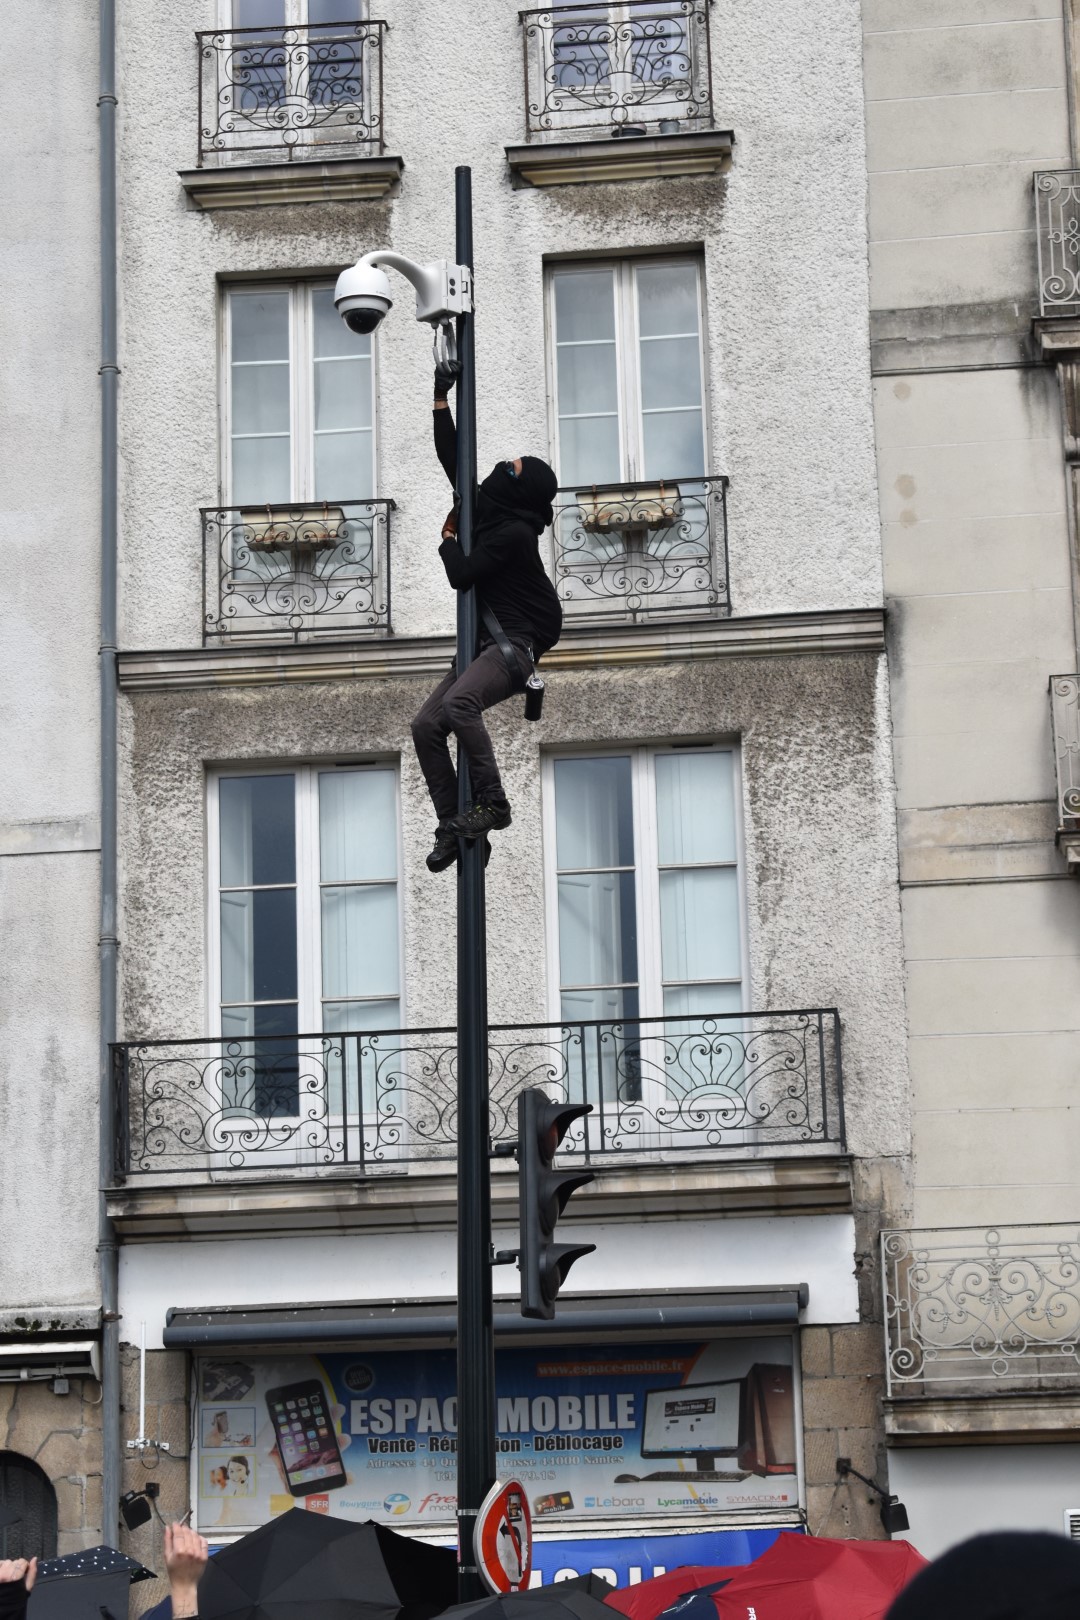 First, let's destroy video surveillance, May 1 protest, Nantes